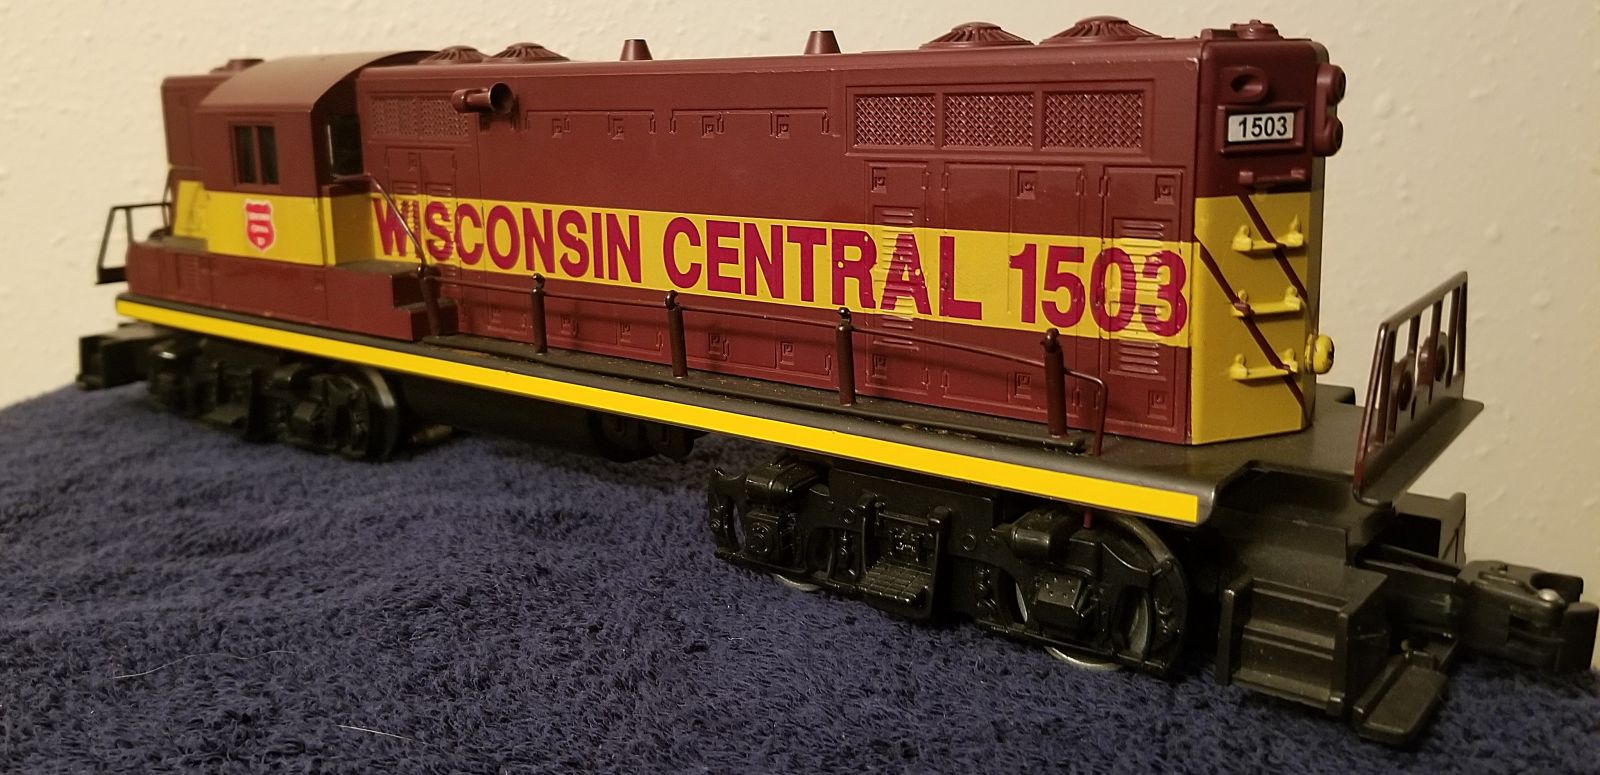 Toy collectibles include train